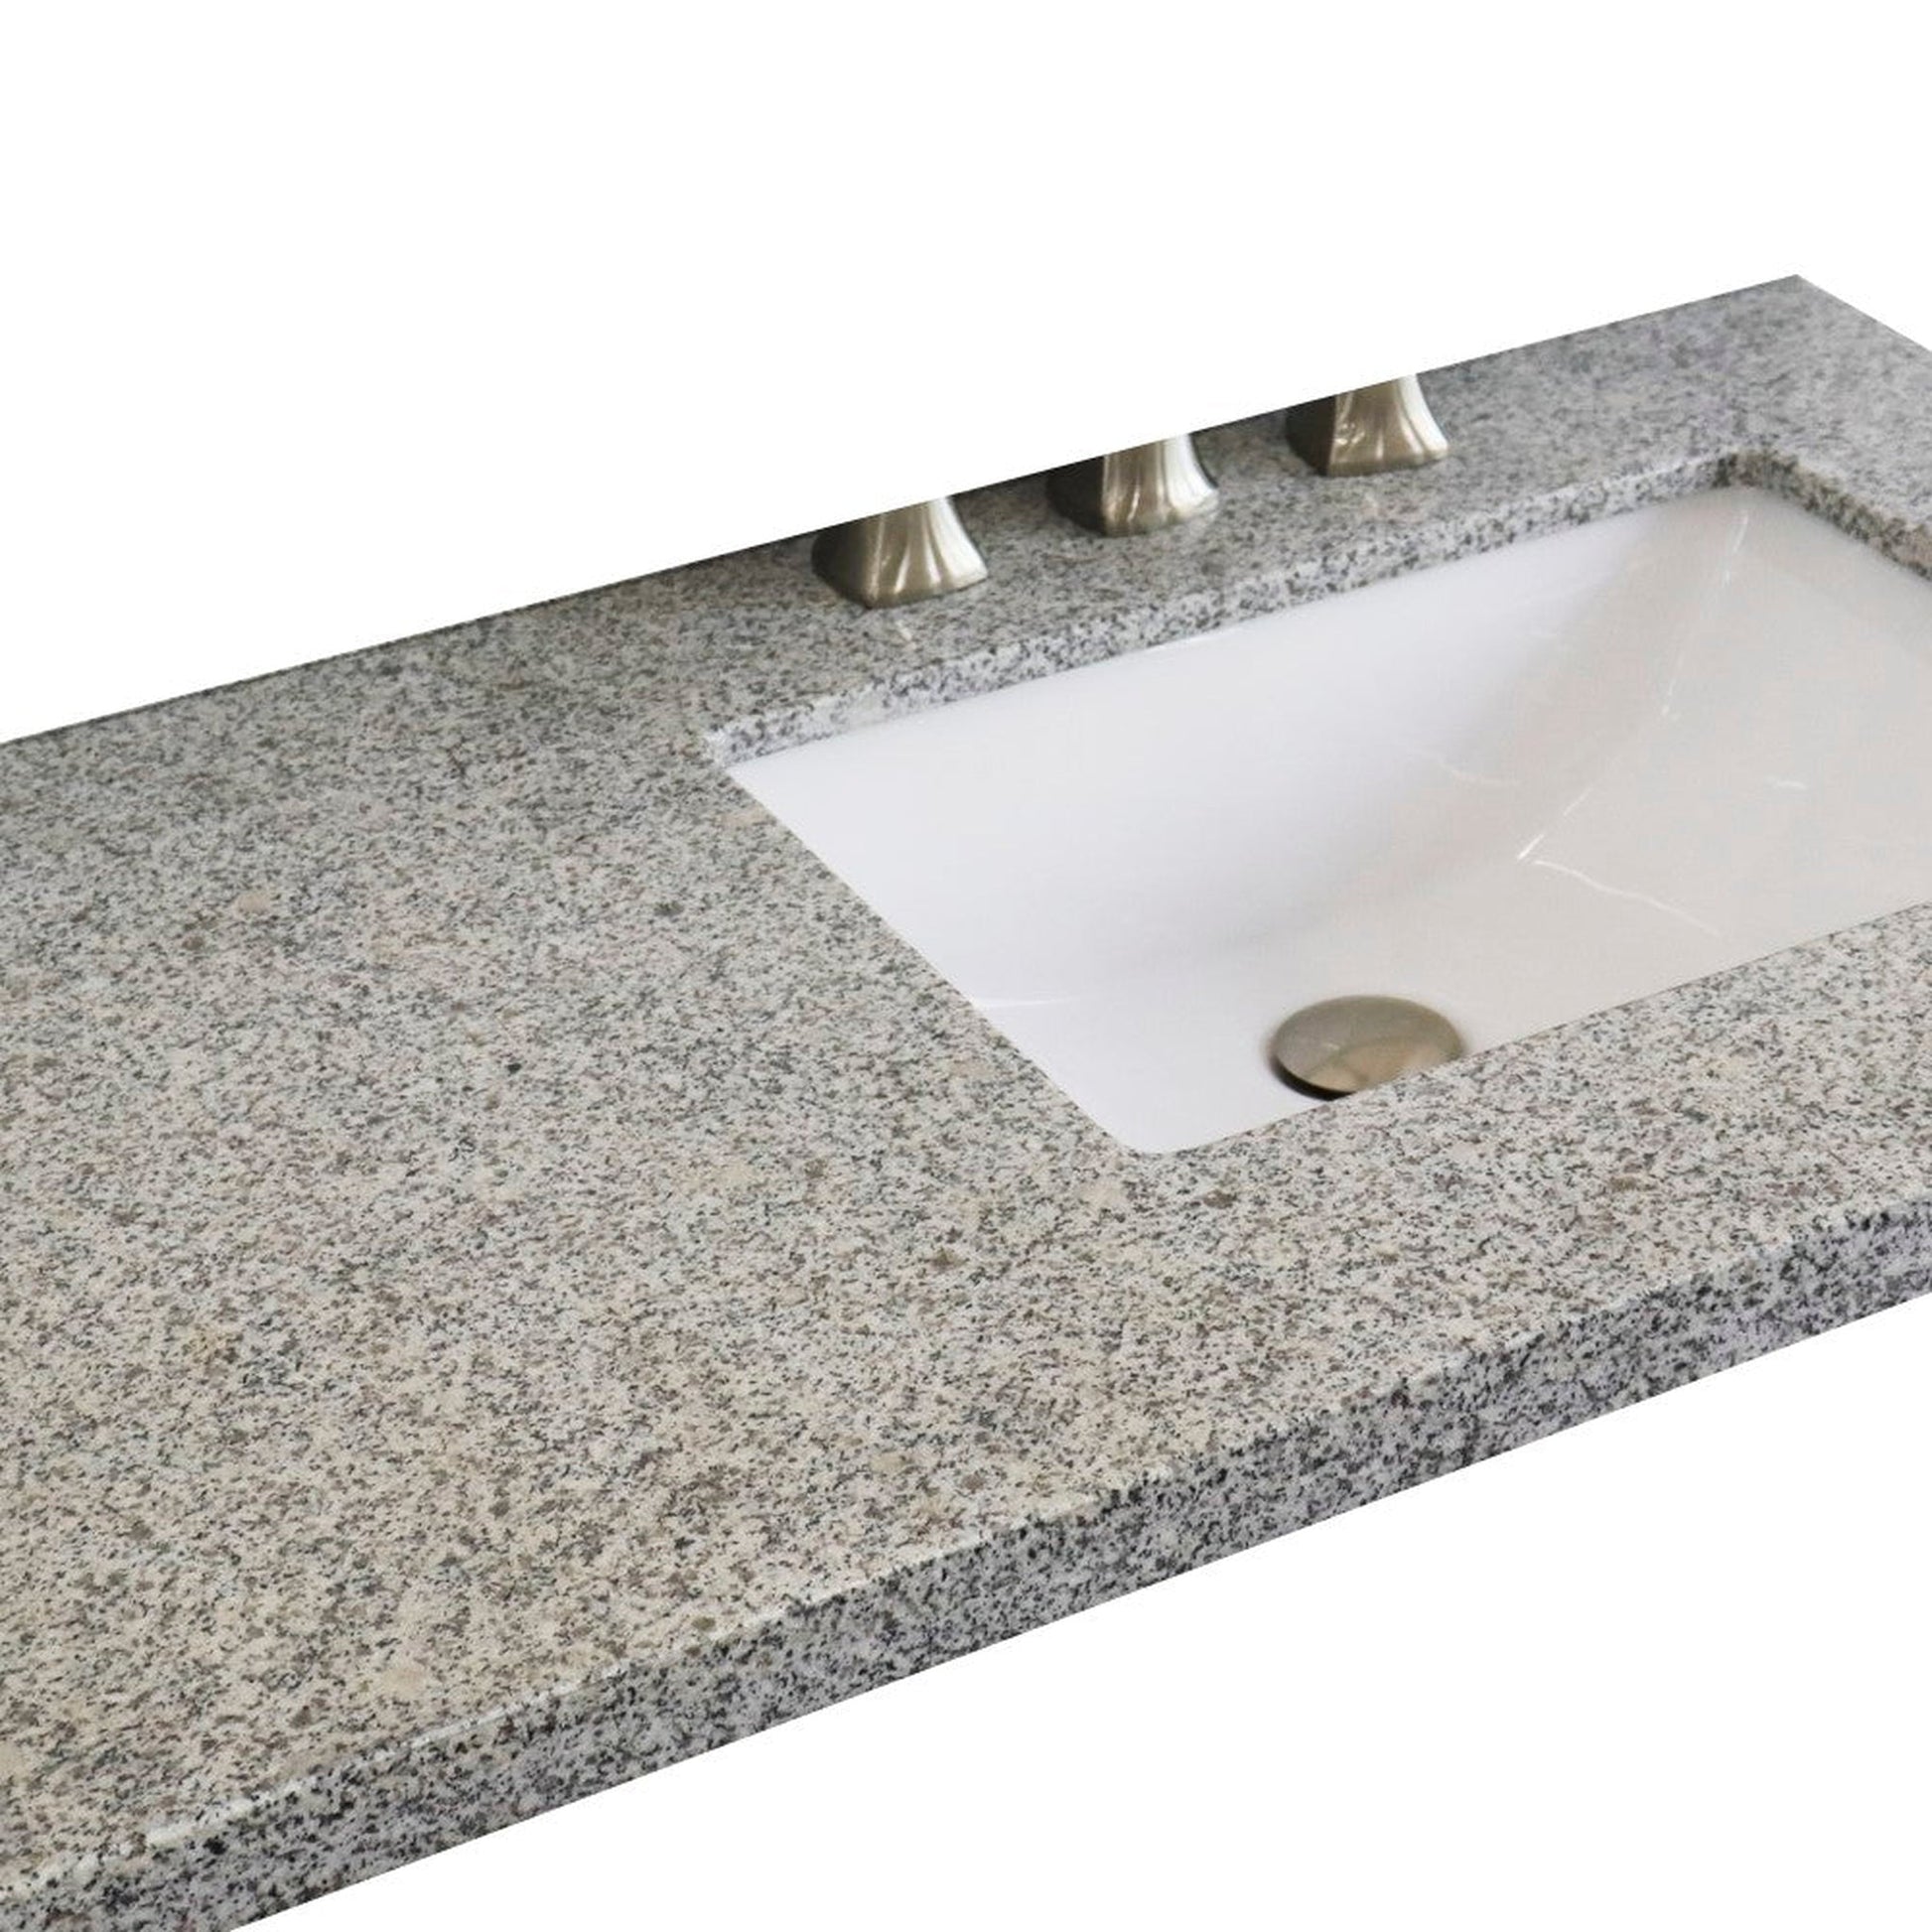 Bellaterra Home 37" x 22" Gray Granite Three Hole Vanity Top With Right Offset Undermount Rectangular Sink and Overflow